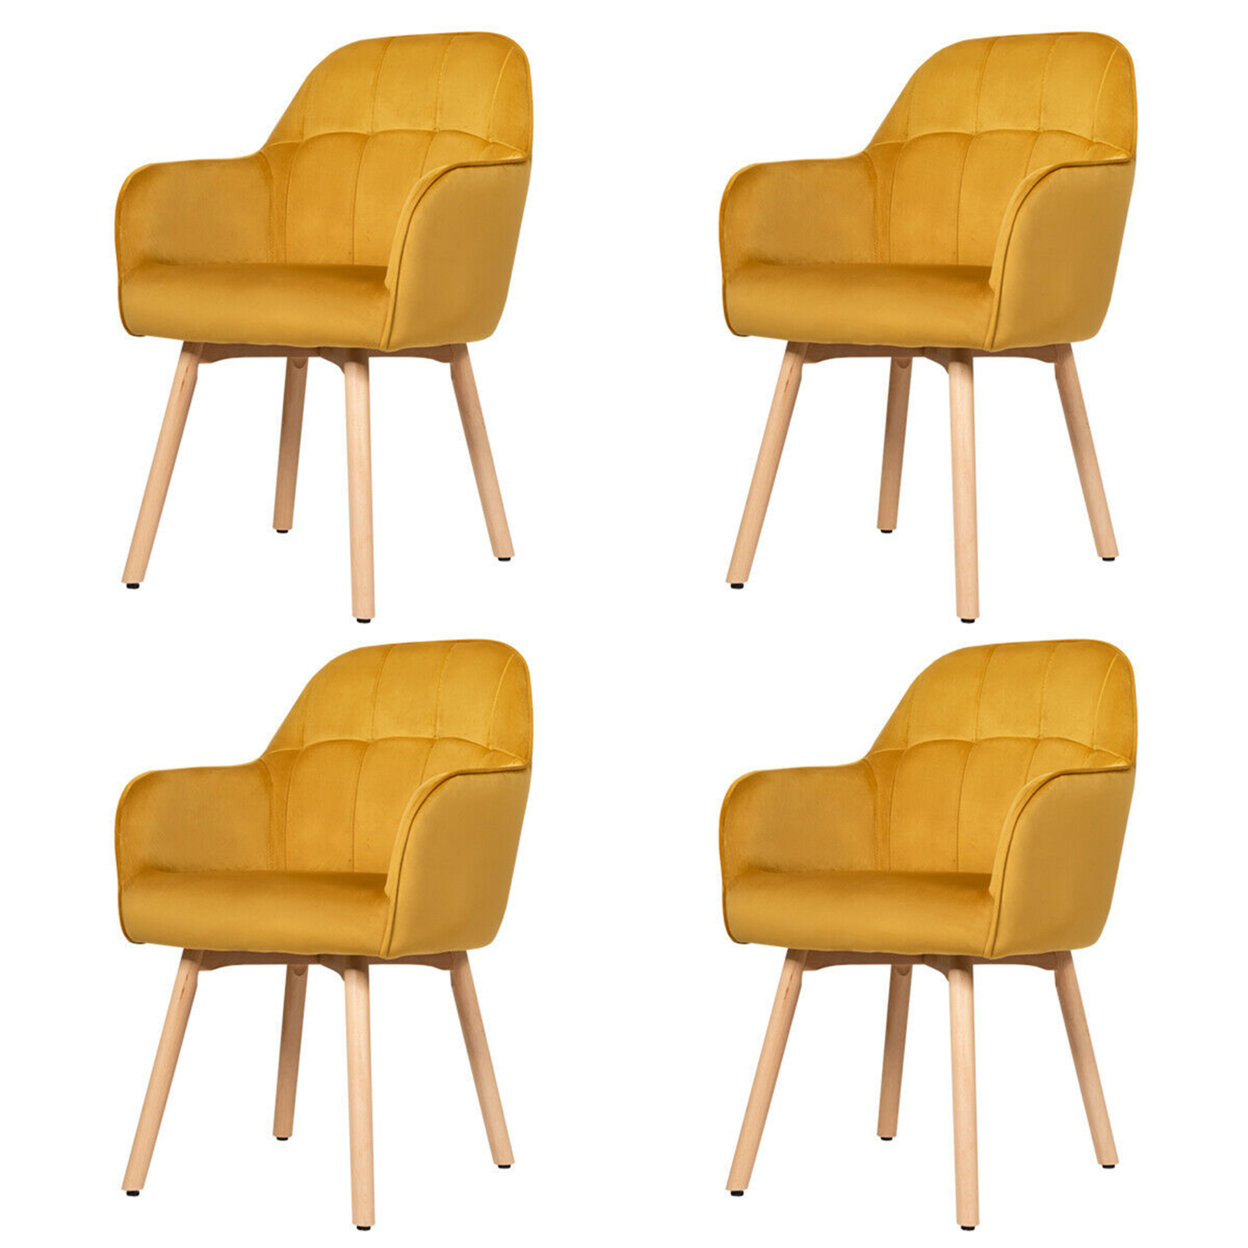 4PCS Modern Accent Armchair Upholstered Leisure Chair W/ Wooden Legs Yellow